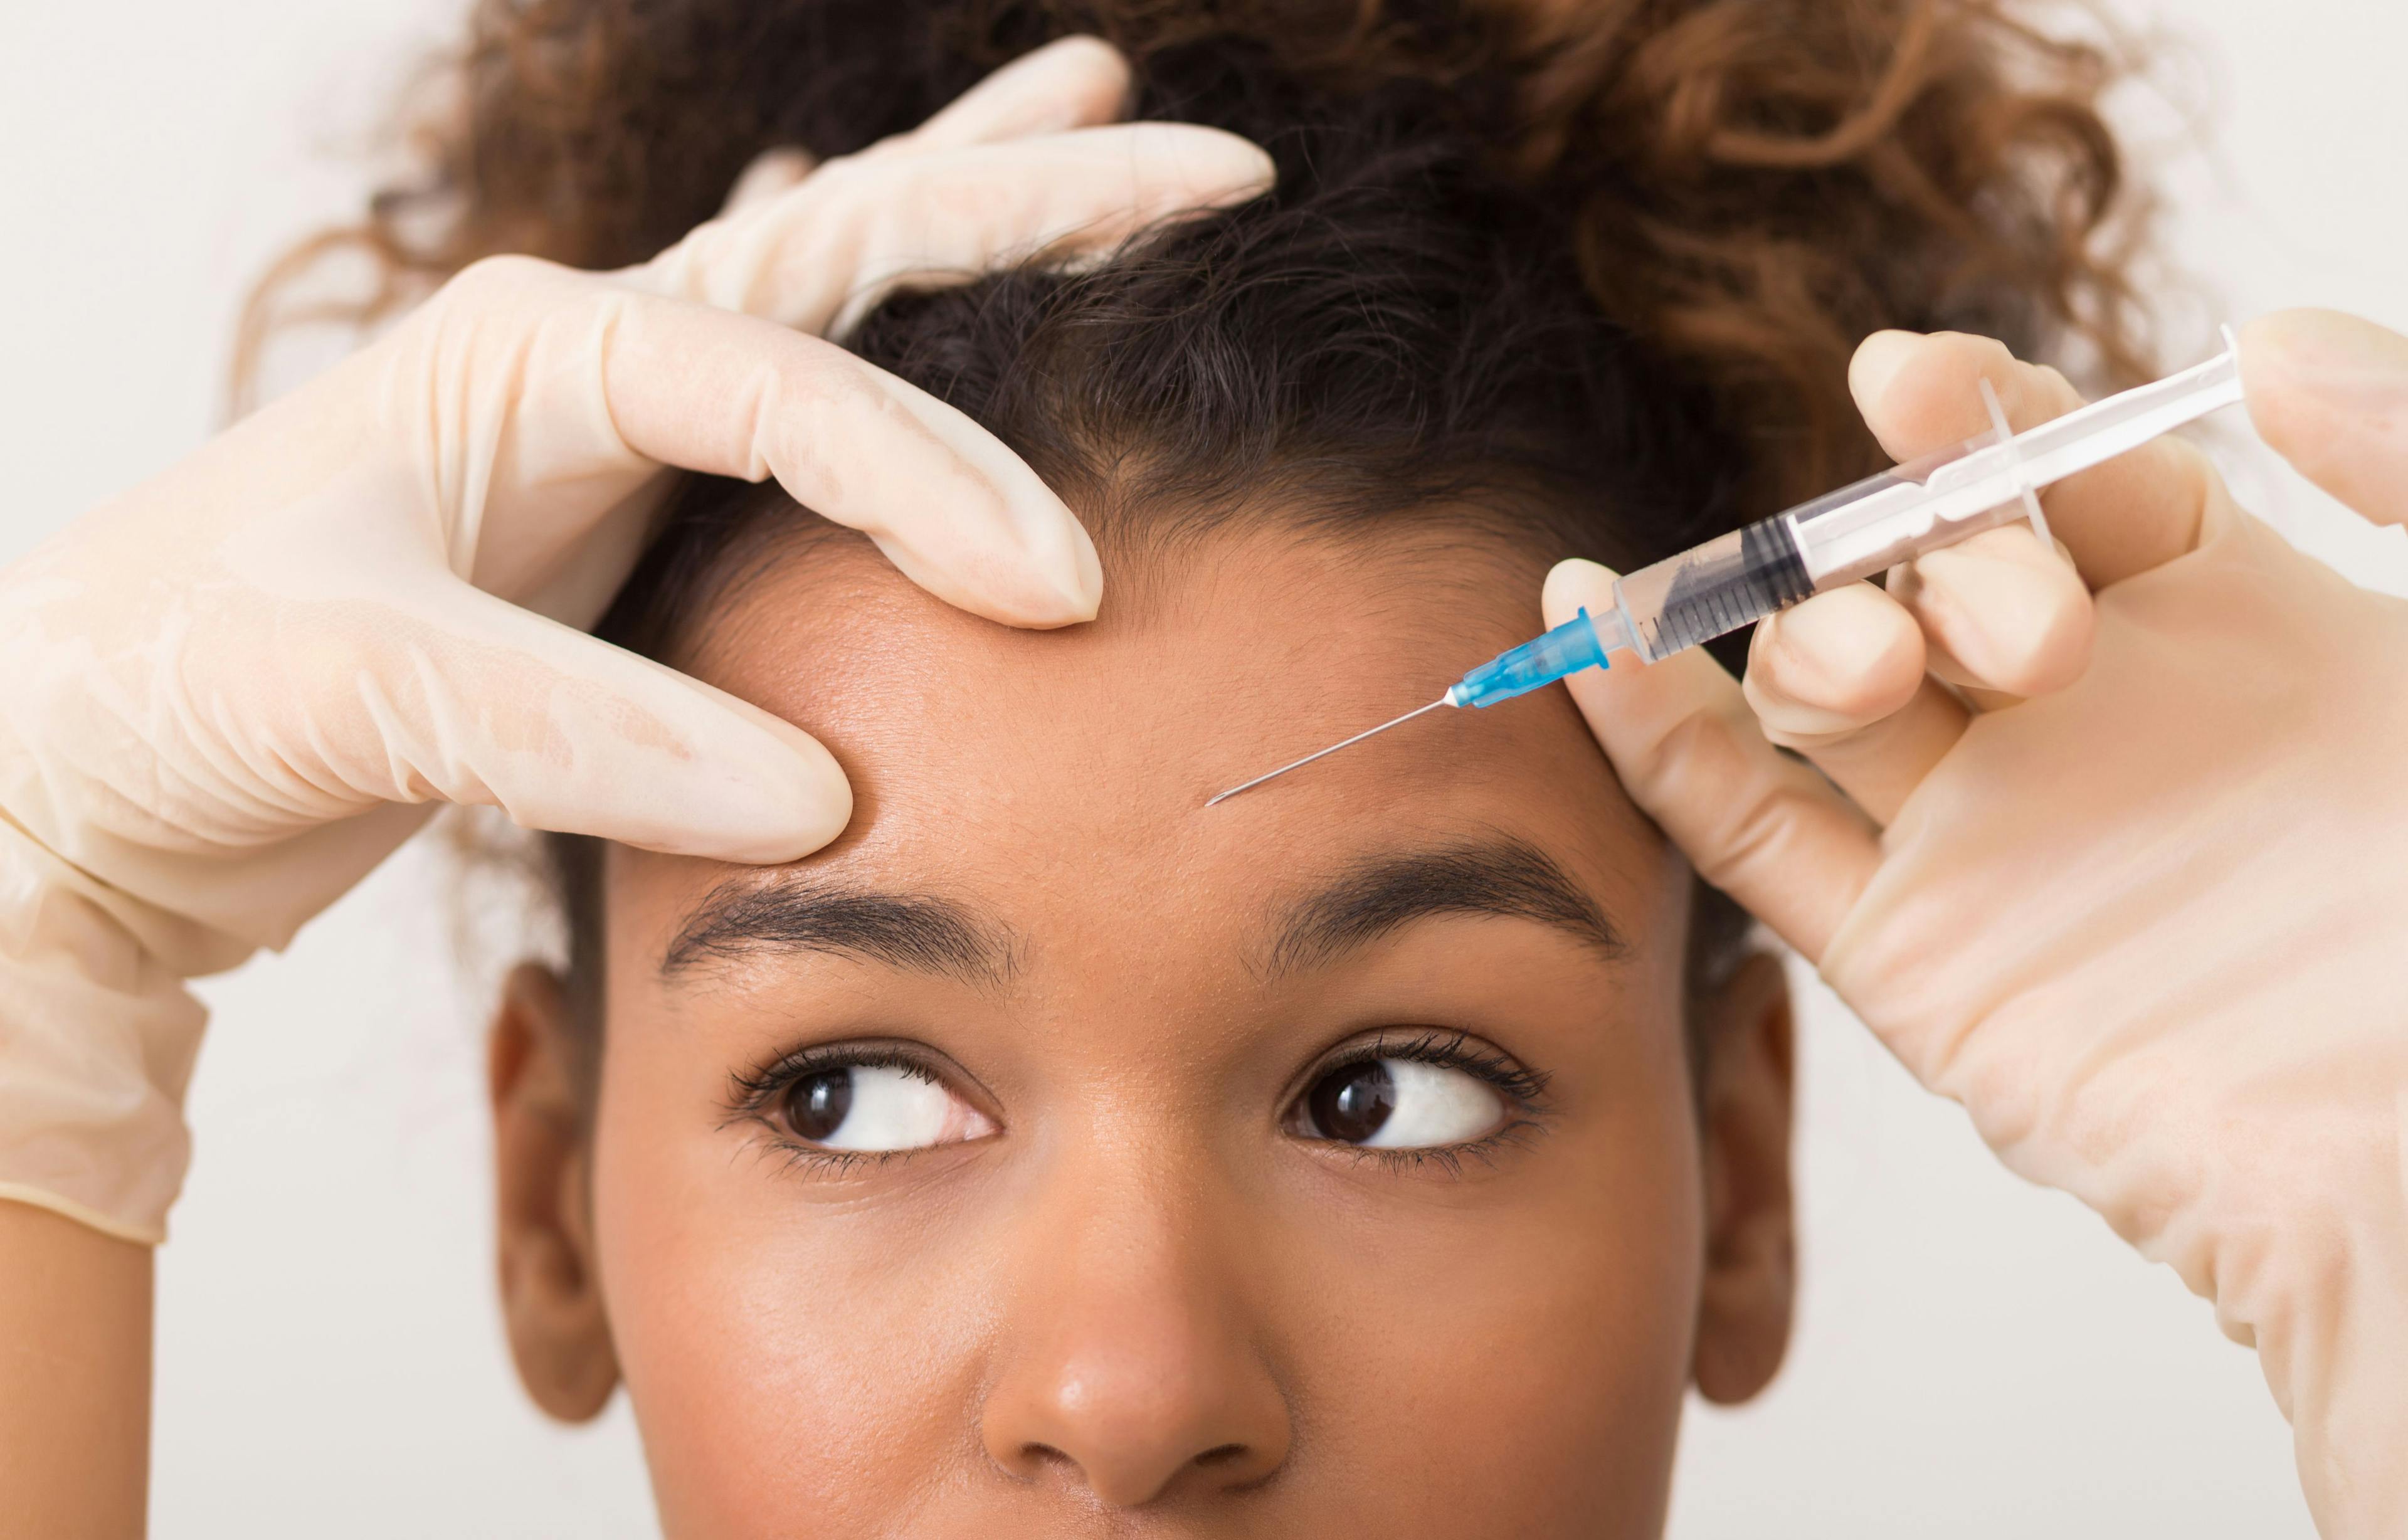 POLL: Has your practice seen a rise in aesthetic procedures since the start of the pandemic?